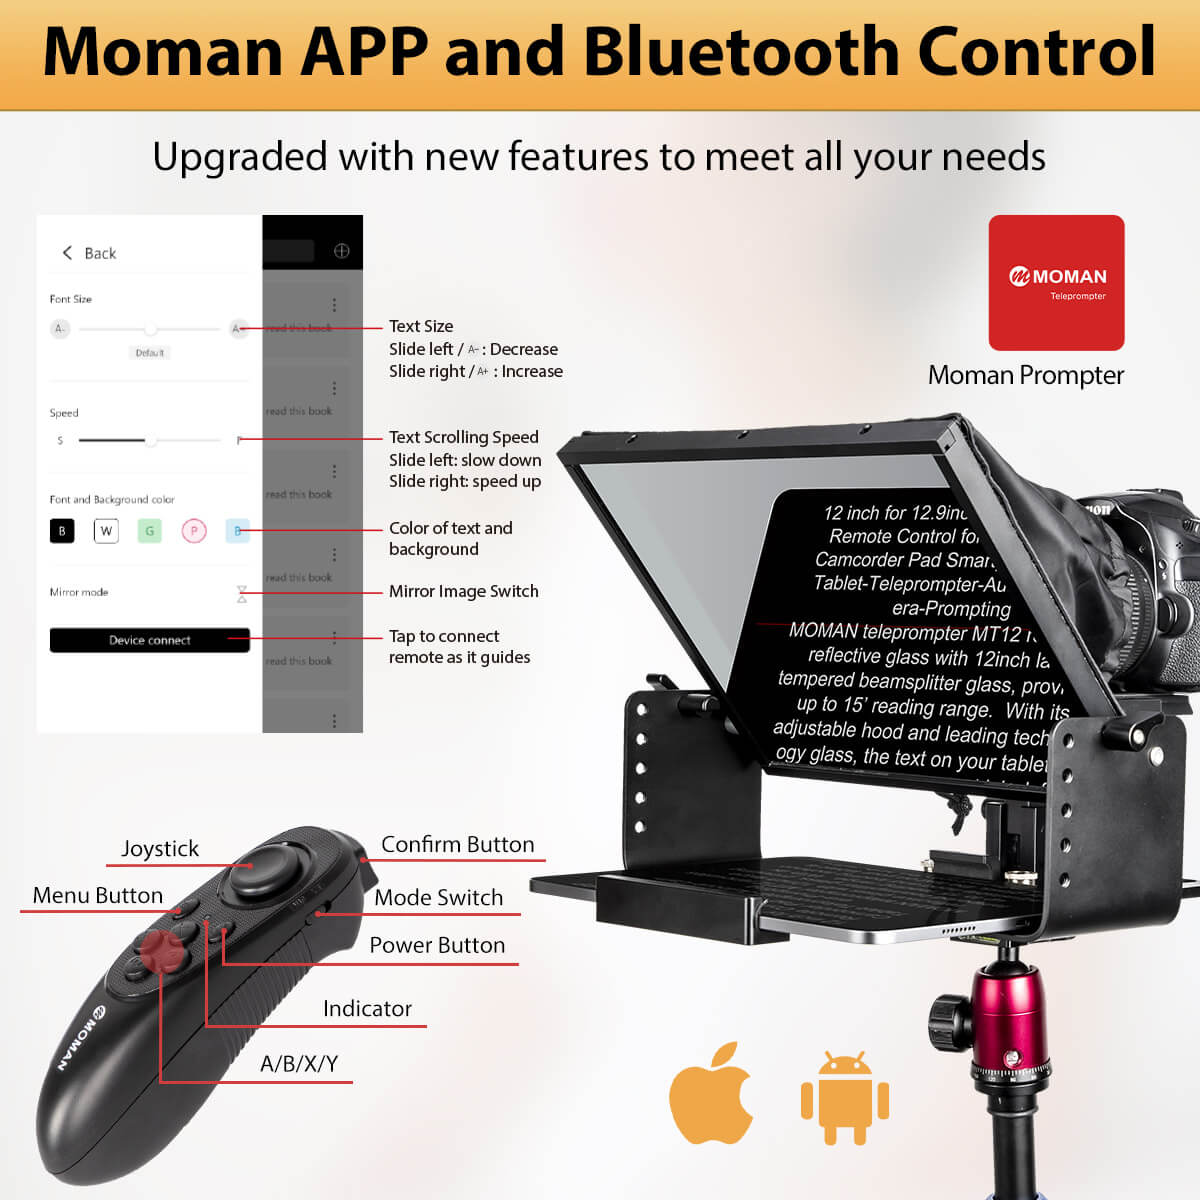 MT12 works with Moman Prompter APP and utilizes the Bluetooth control for adjustment of text size, scrolling speed, and more